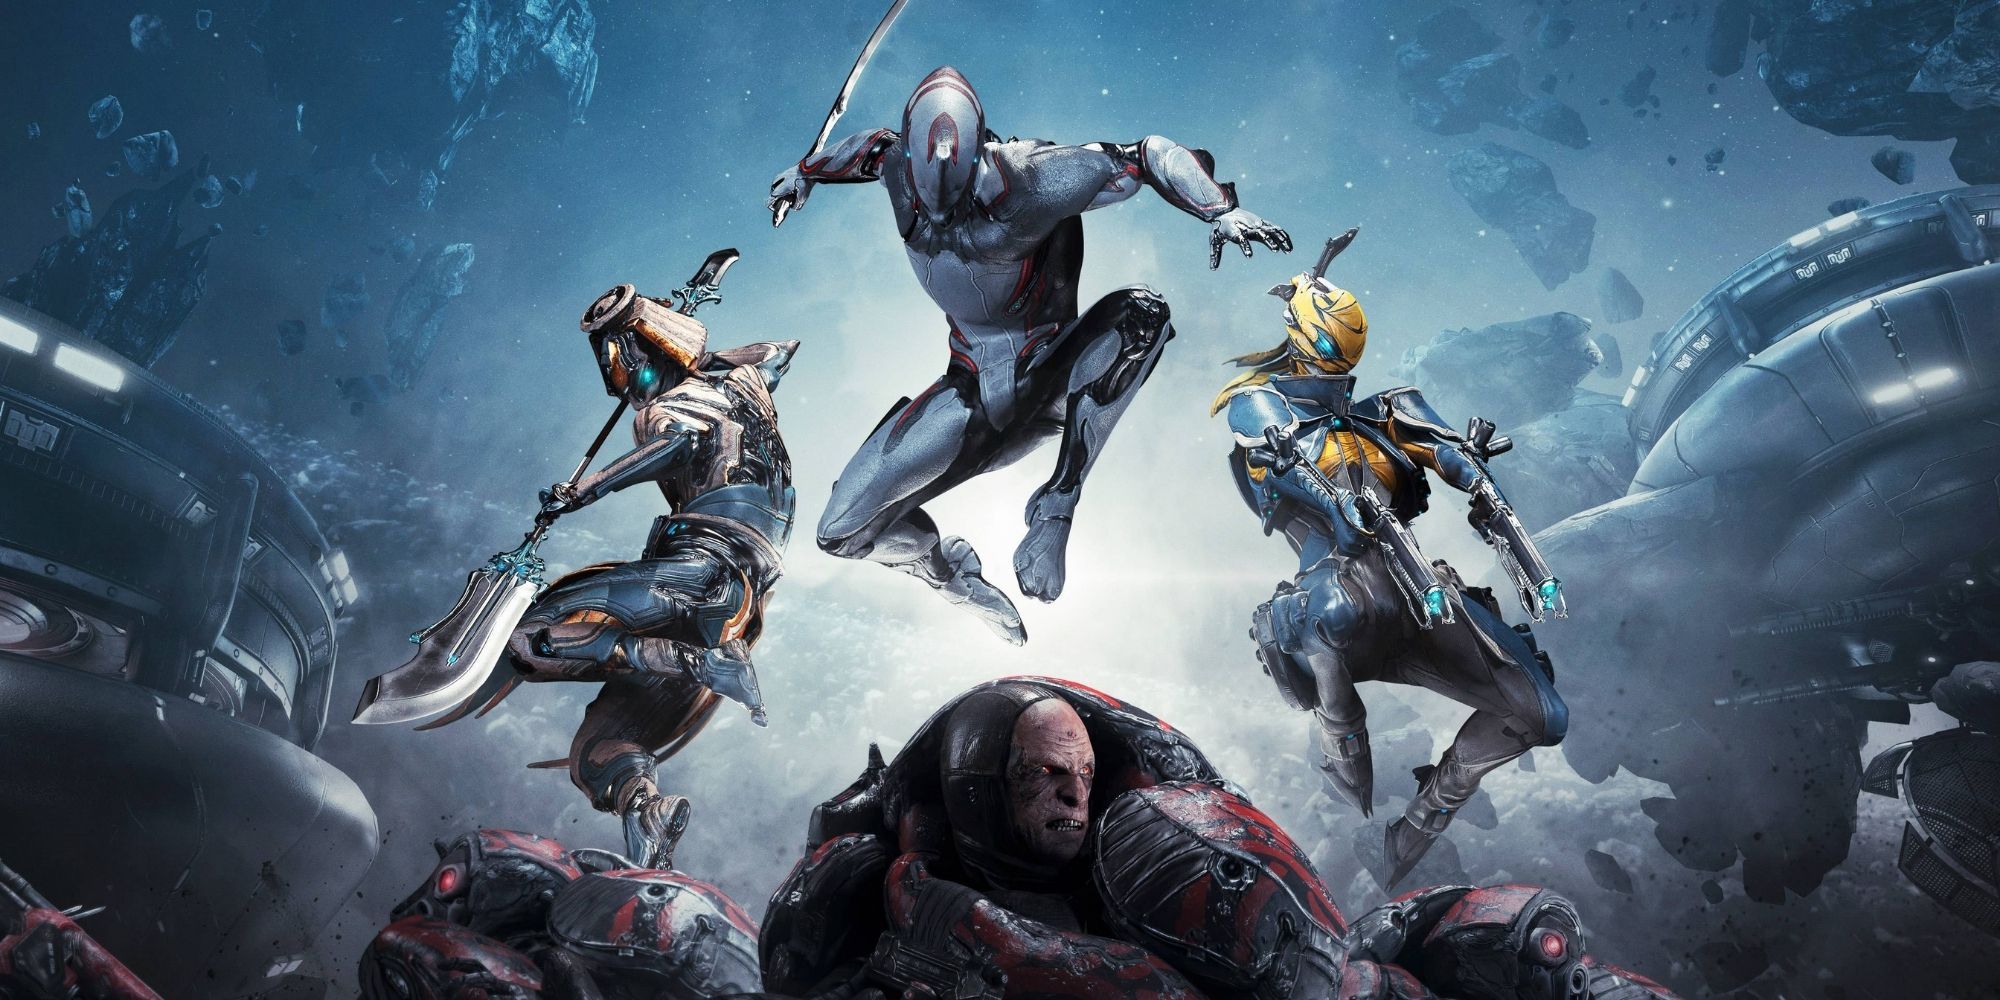 An official image from Warframe of various Warframes.